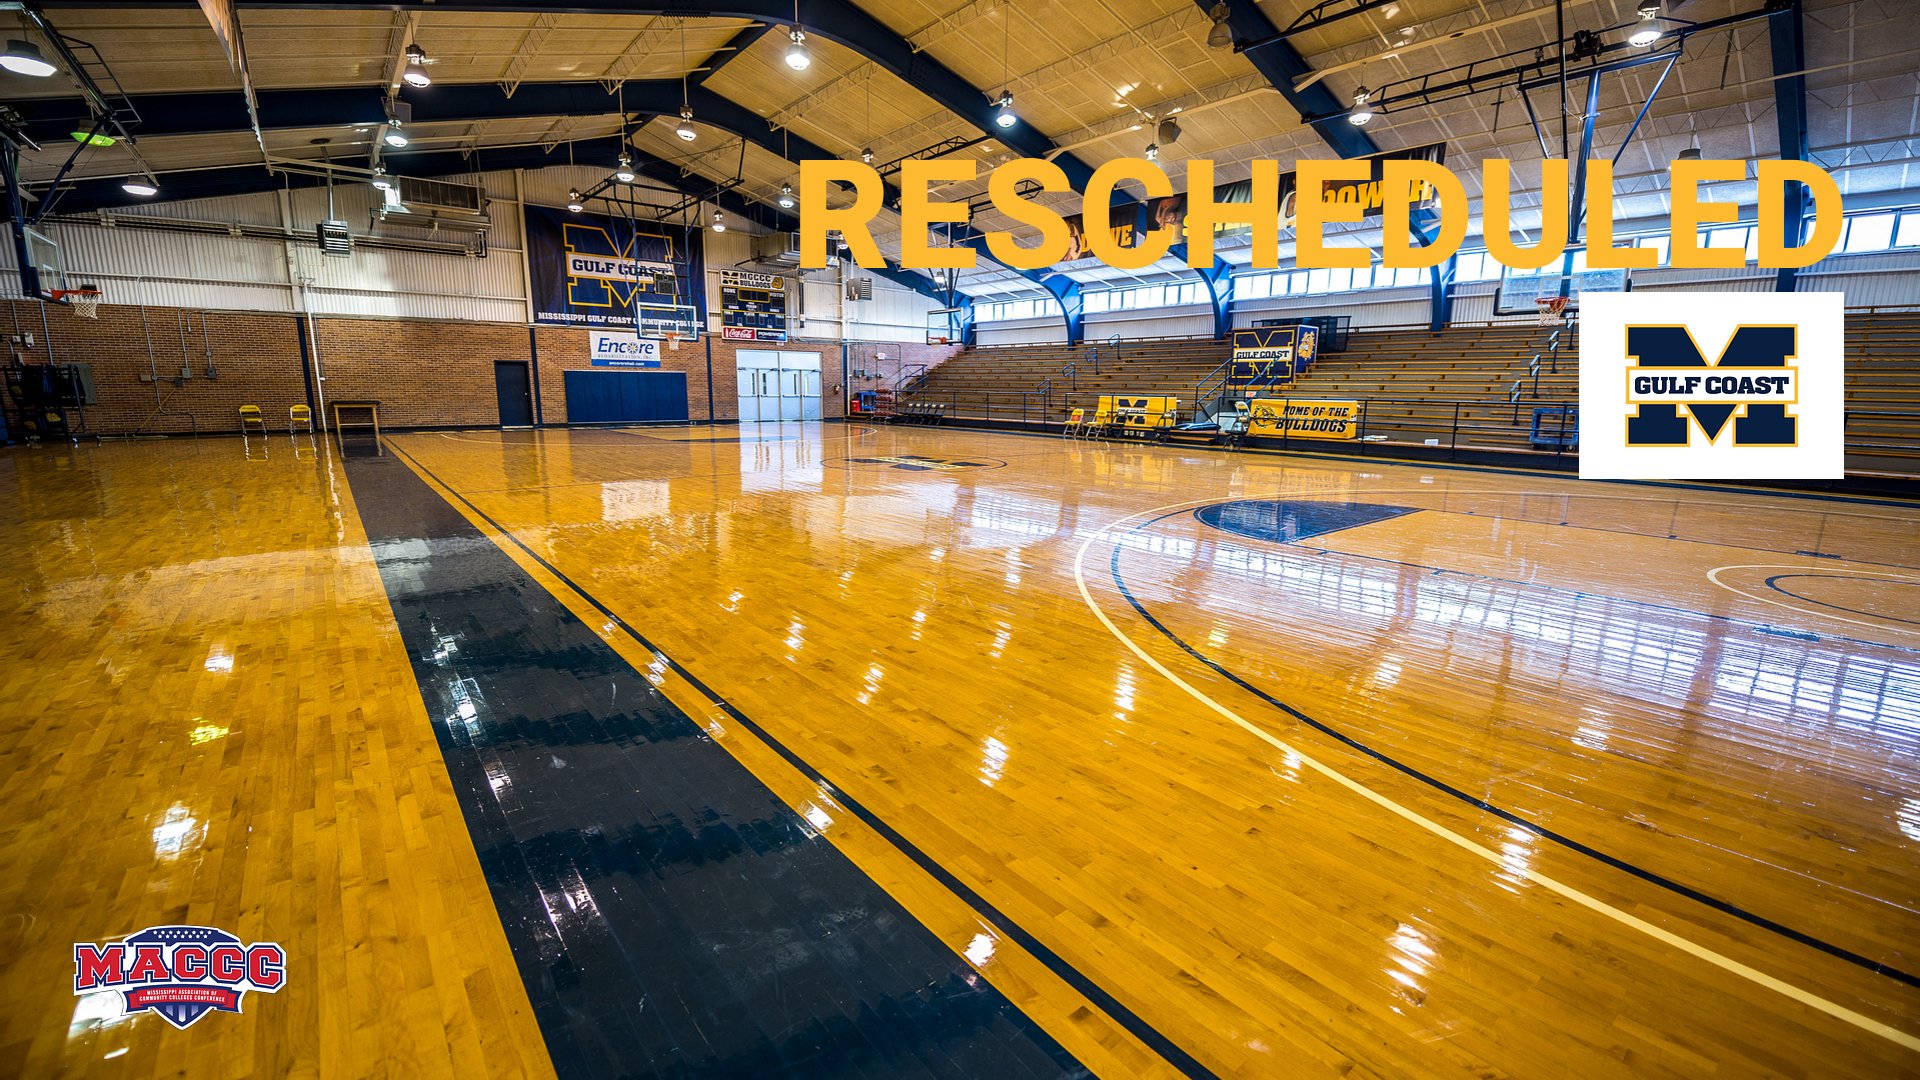 Basketball games against Hinds rescheduled